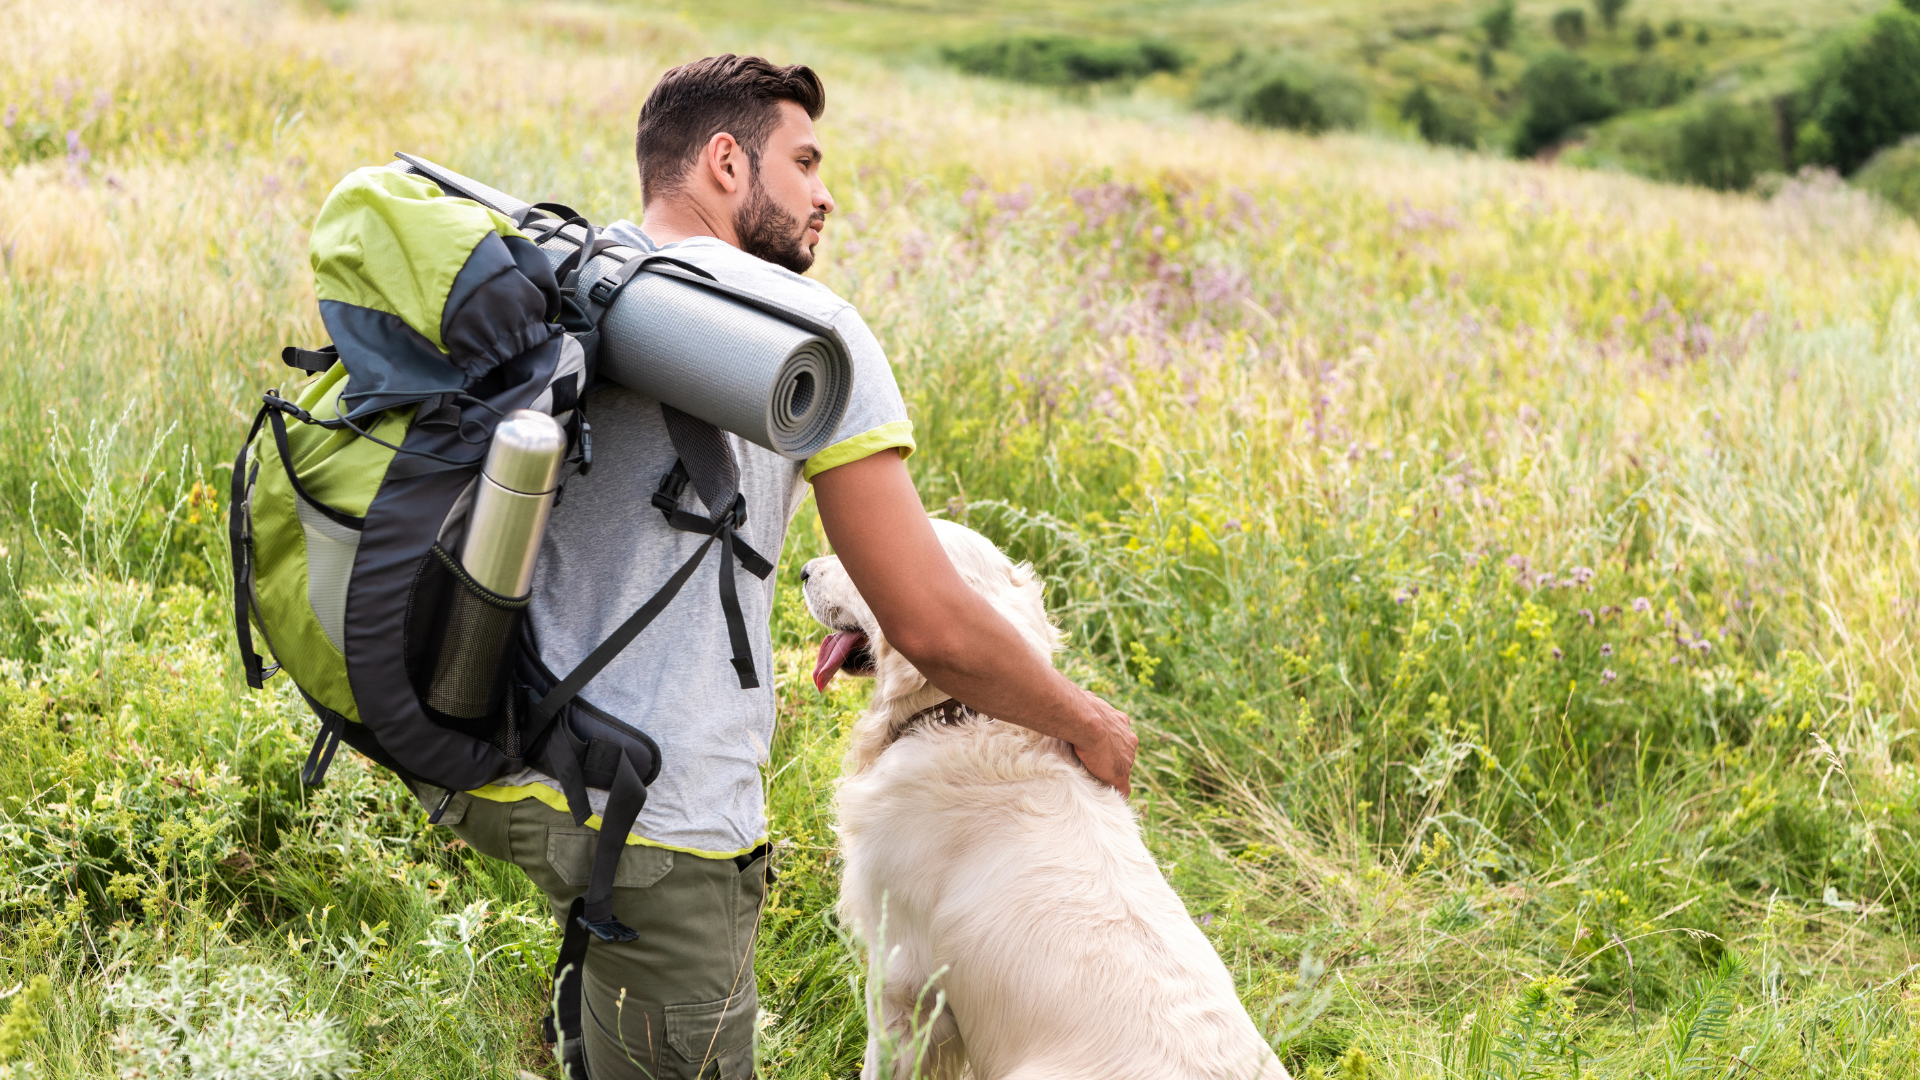 Preparing Your Dog for Their First Hike